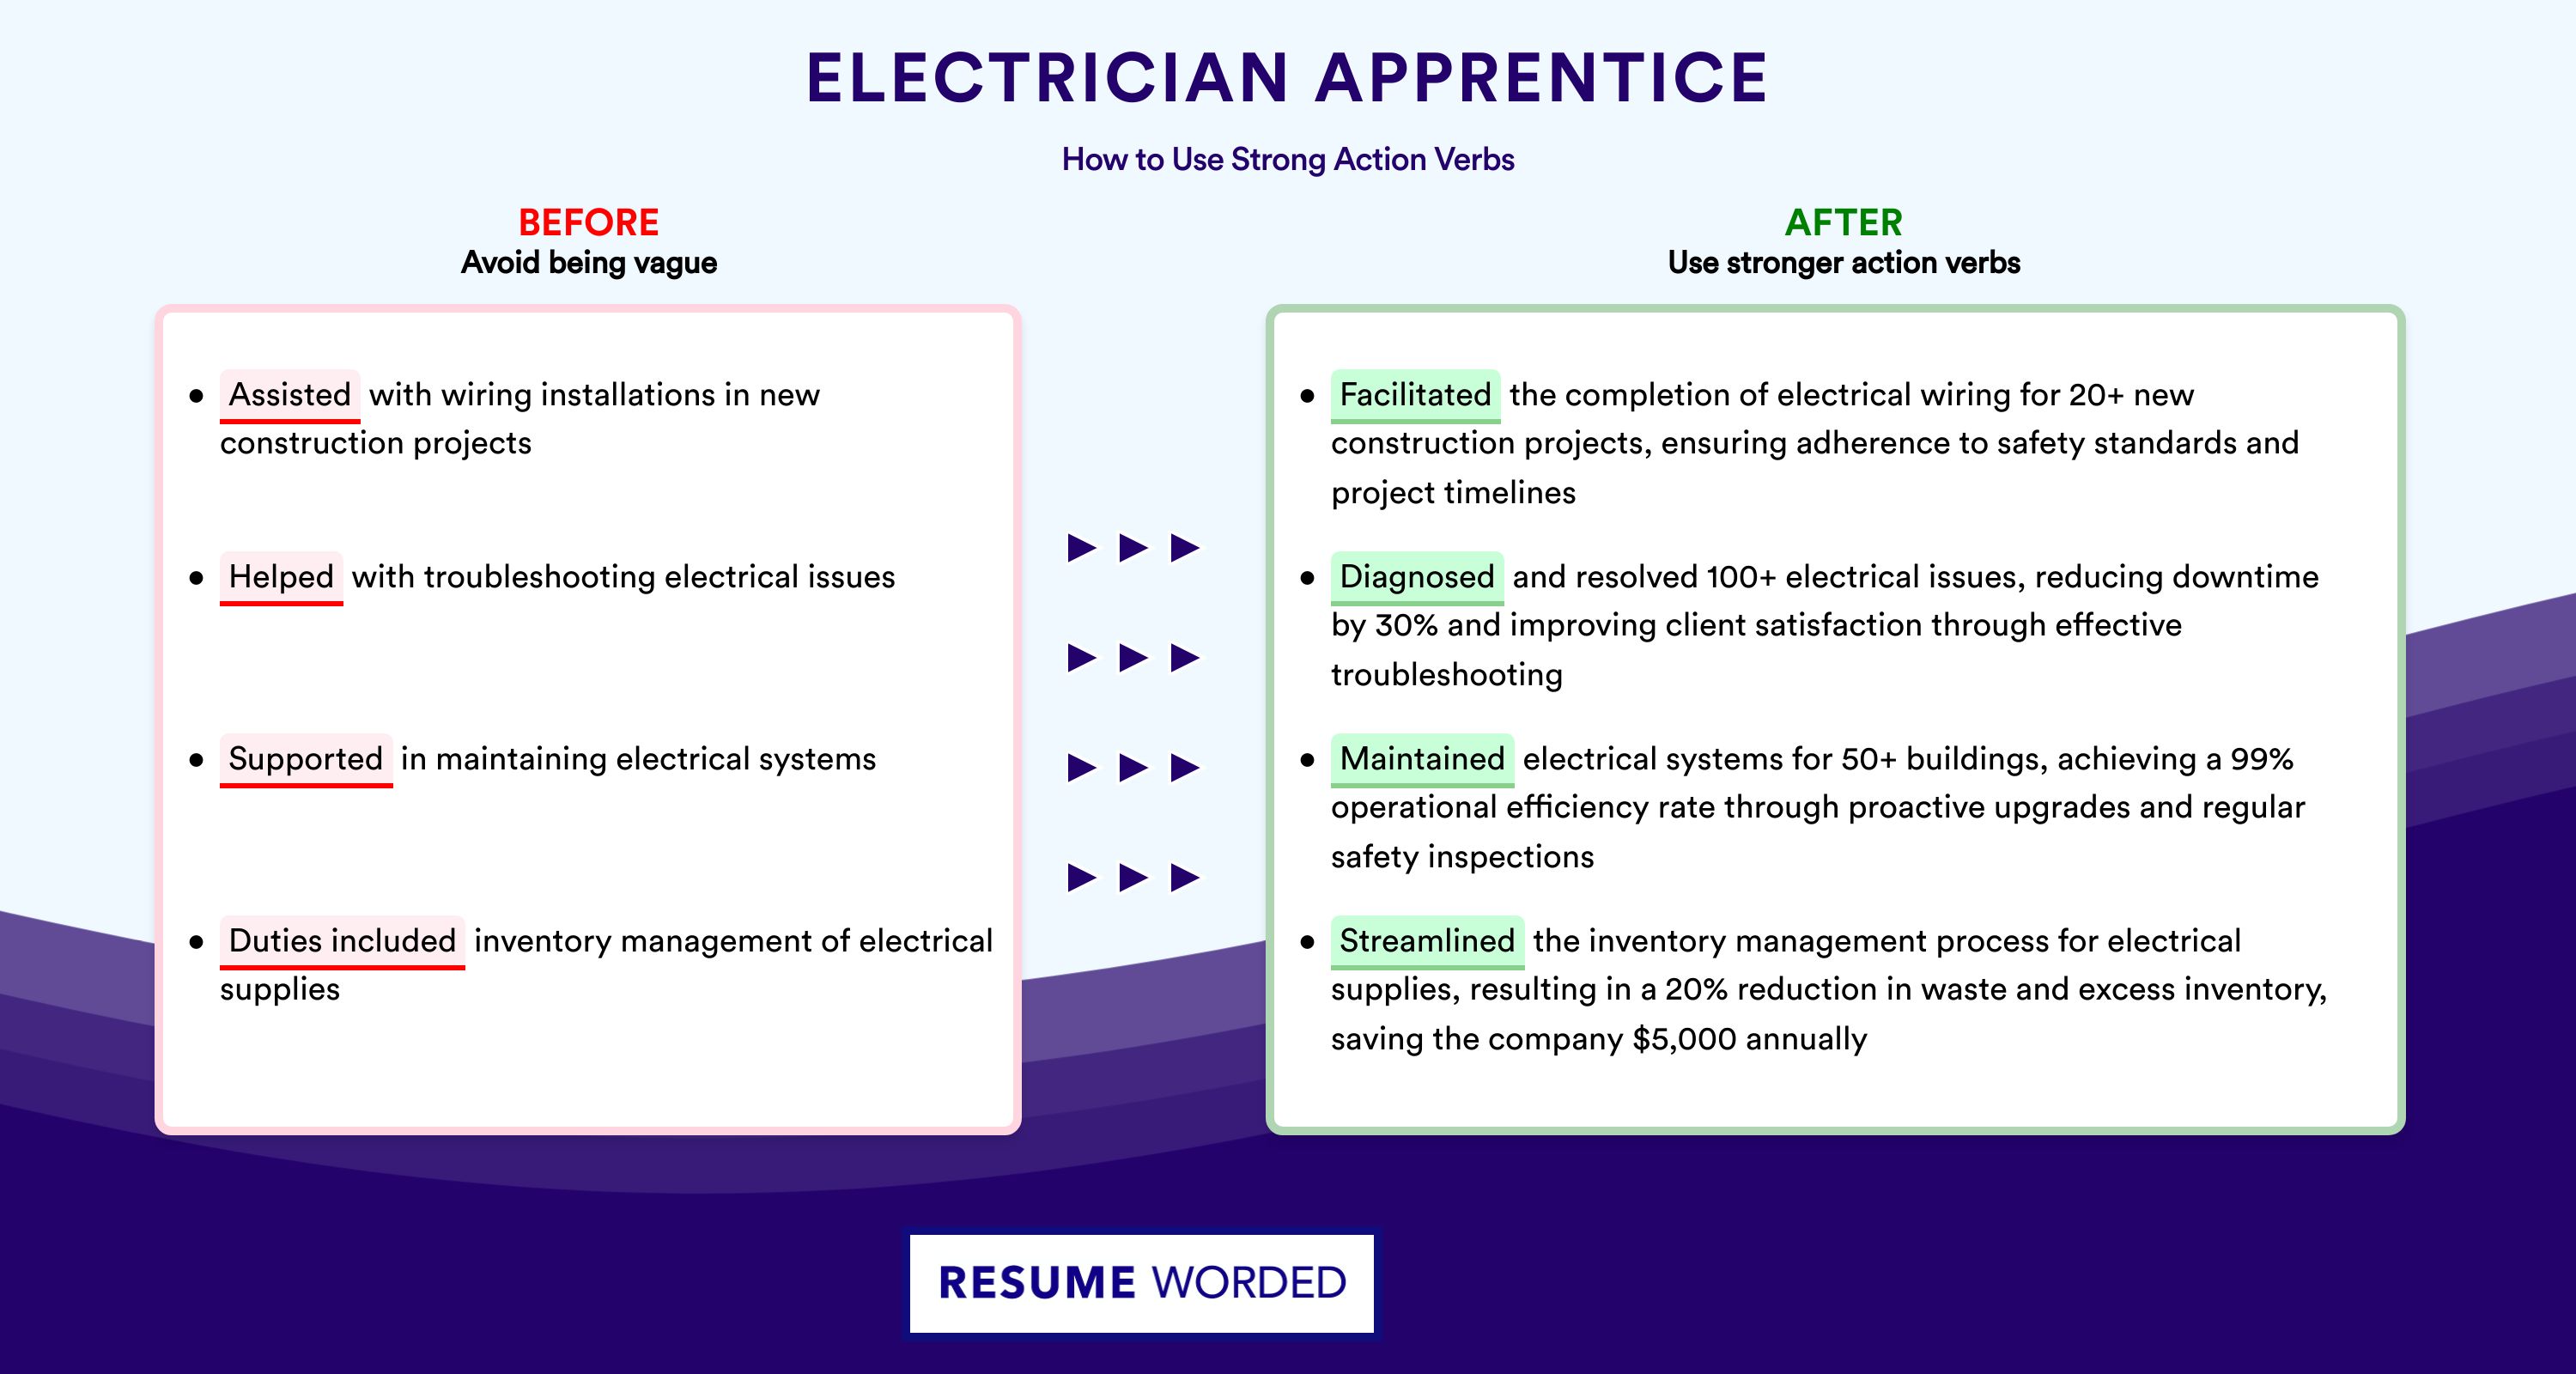 Action Verbs for Electrician Apprentice